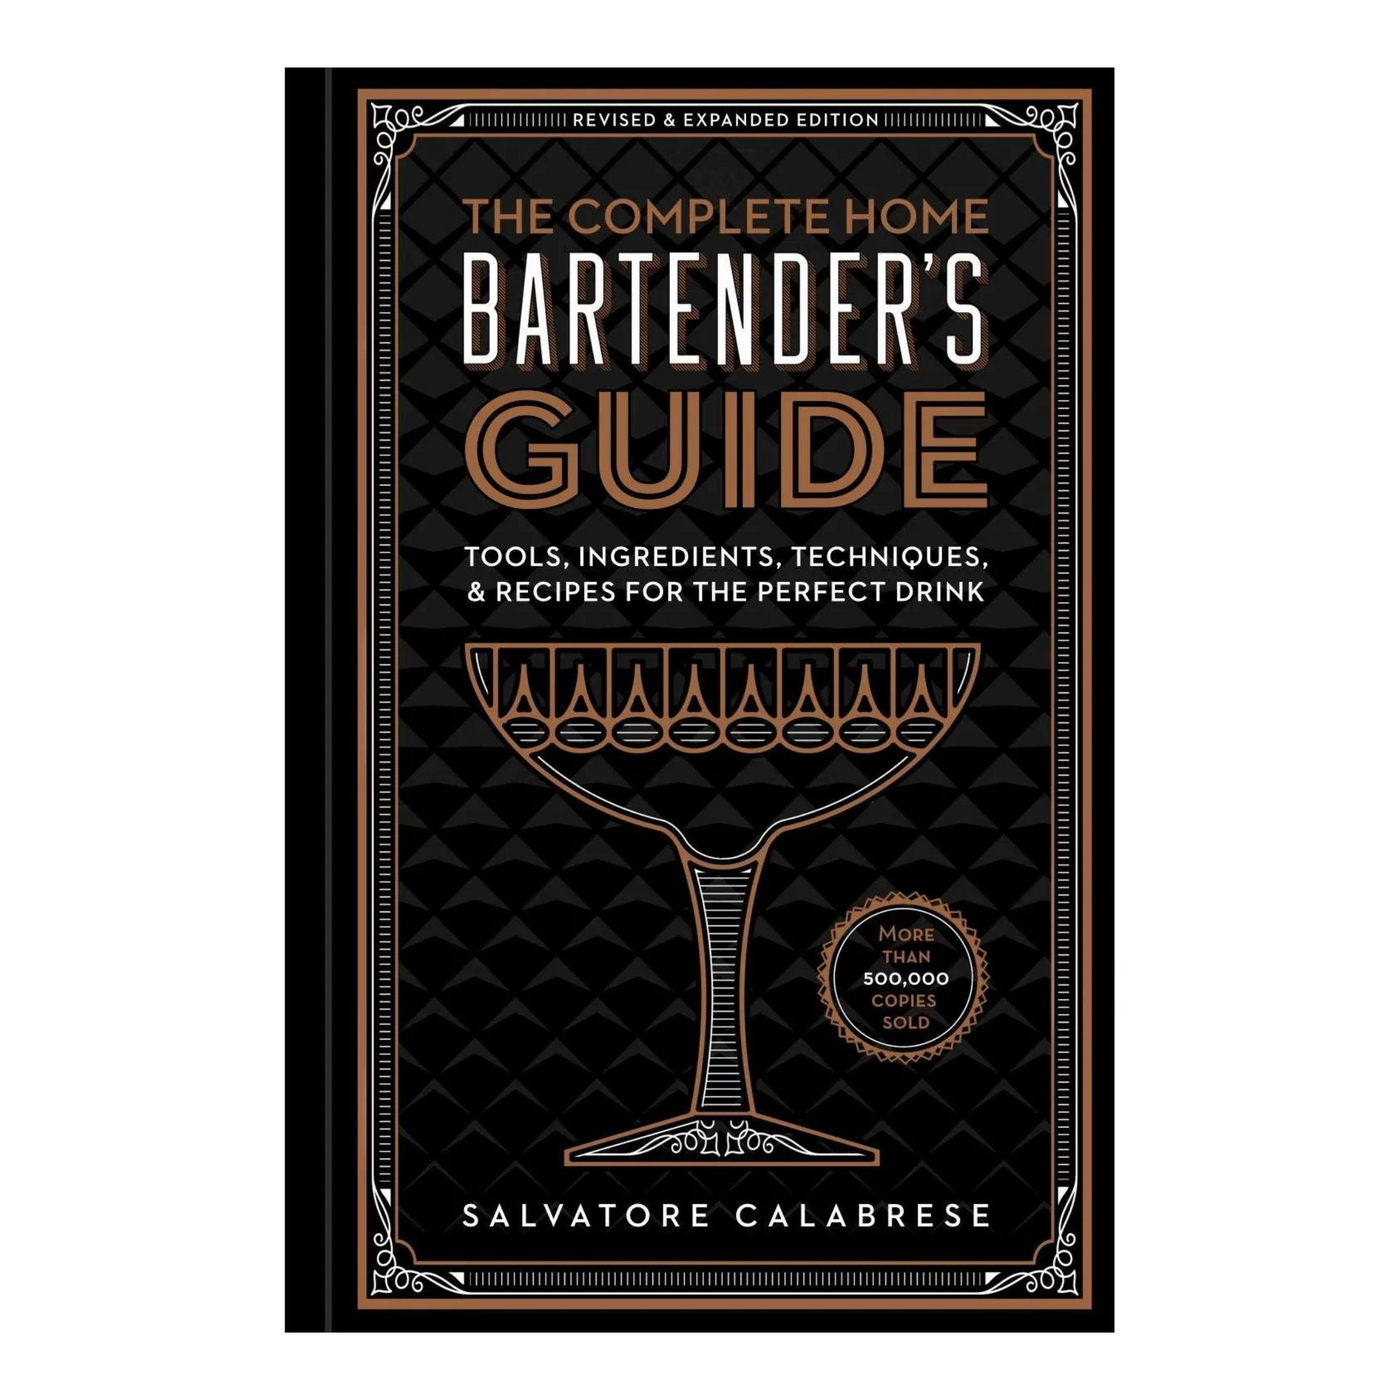 The Complete Home Bartender?s Guide - SalvatoreCalabrese